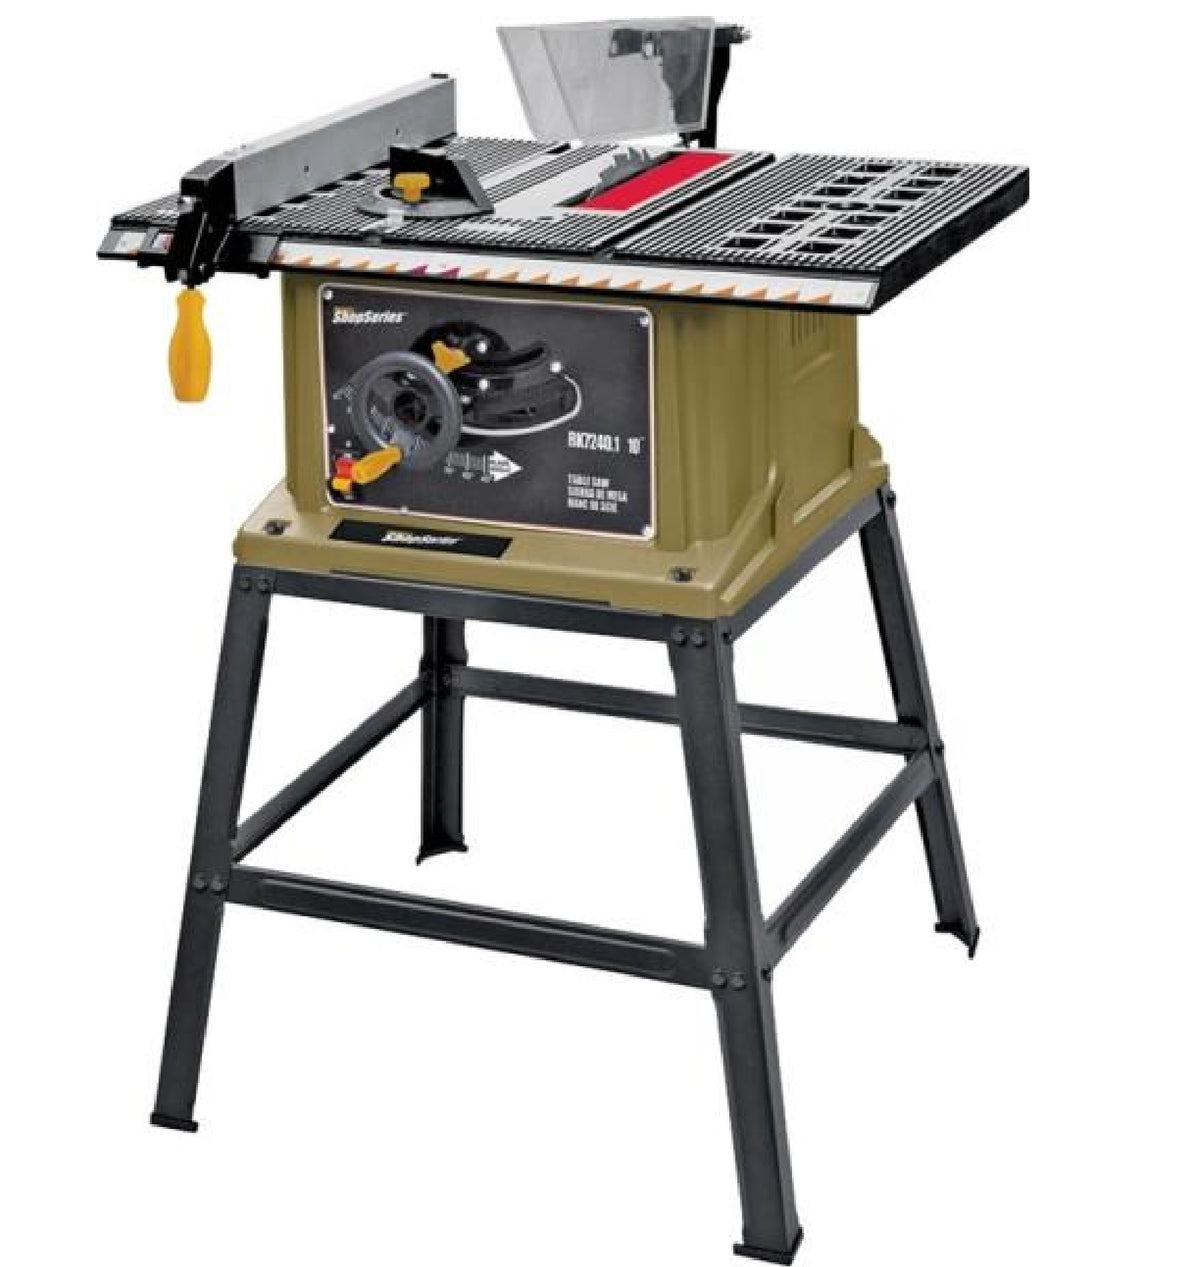 Buy shop series table saw ss7202 - Online store for bench &  stationary, table in USA, on sale, low price, discount deals, coupon code